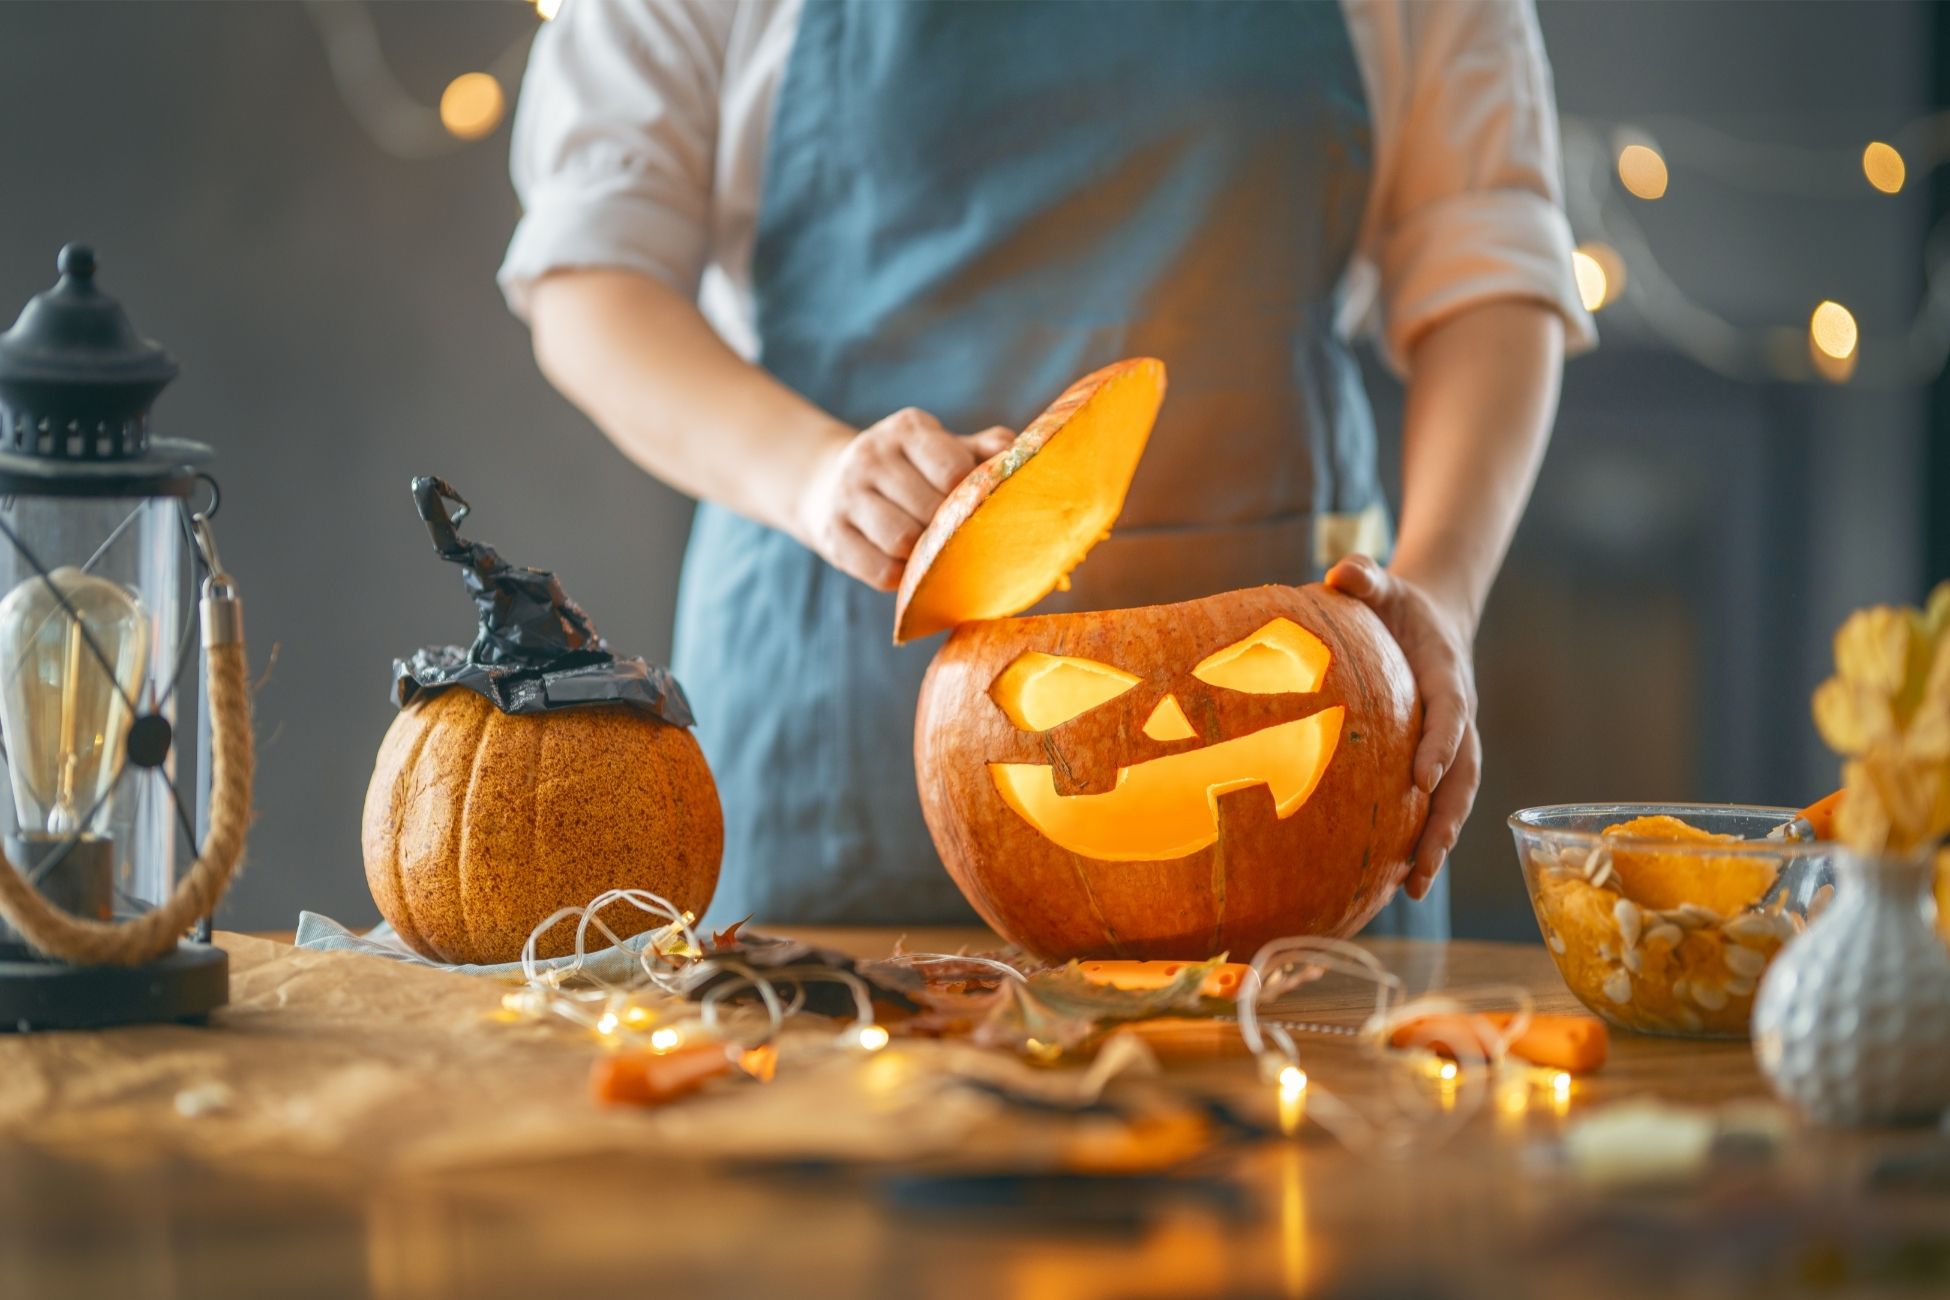 Carving Pumpkins Safely This Halloween